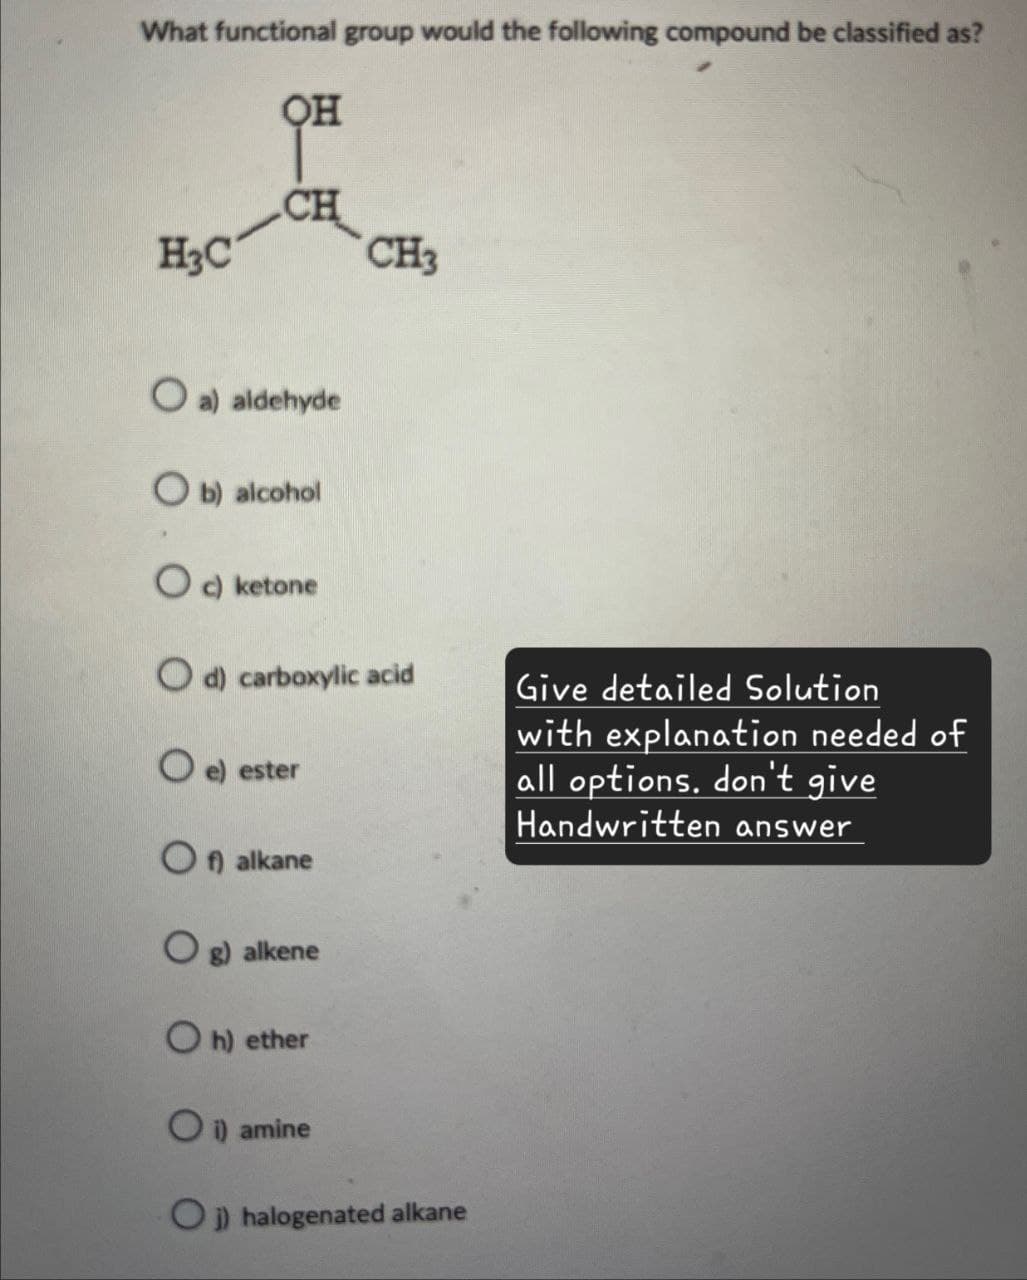 What functional group would the following compound be classified as?
H3C
OH
CH
CH3
O a) aldehyde
b) alcohol
Oc) ketone
Od) carboxylic acid
O e) ester
Of) alkane
Og) alkene
Oh) ether
O i) amine
Oj) halogenated alkane
Give detailed Solution
with explanation needed of
all options. don't give
Handwritten answer